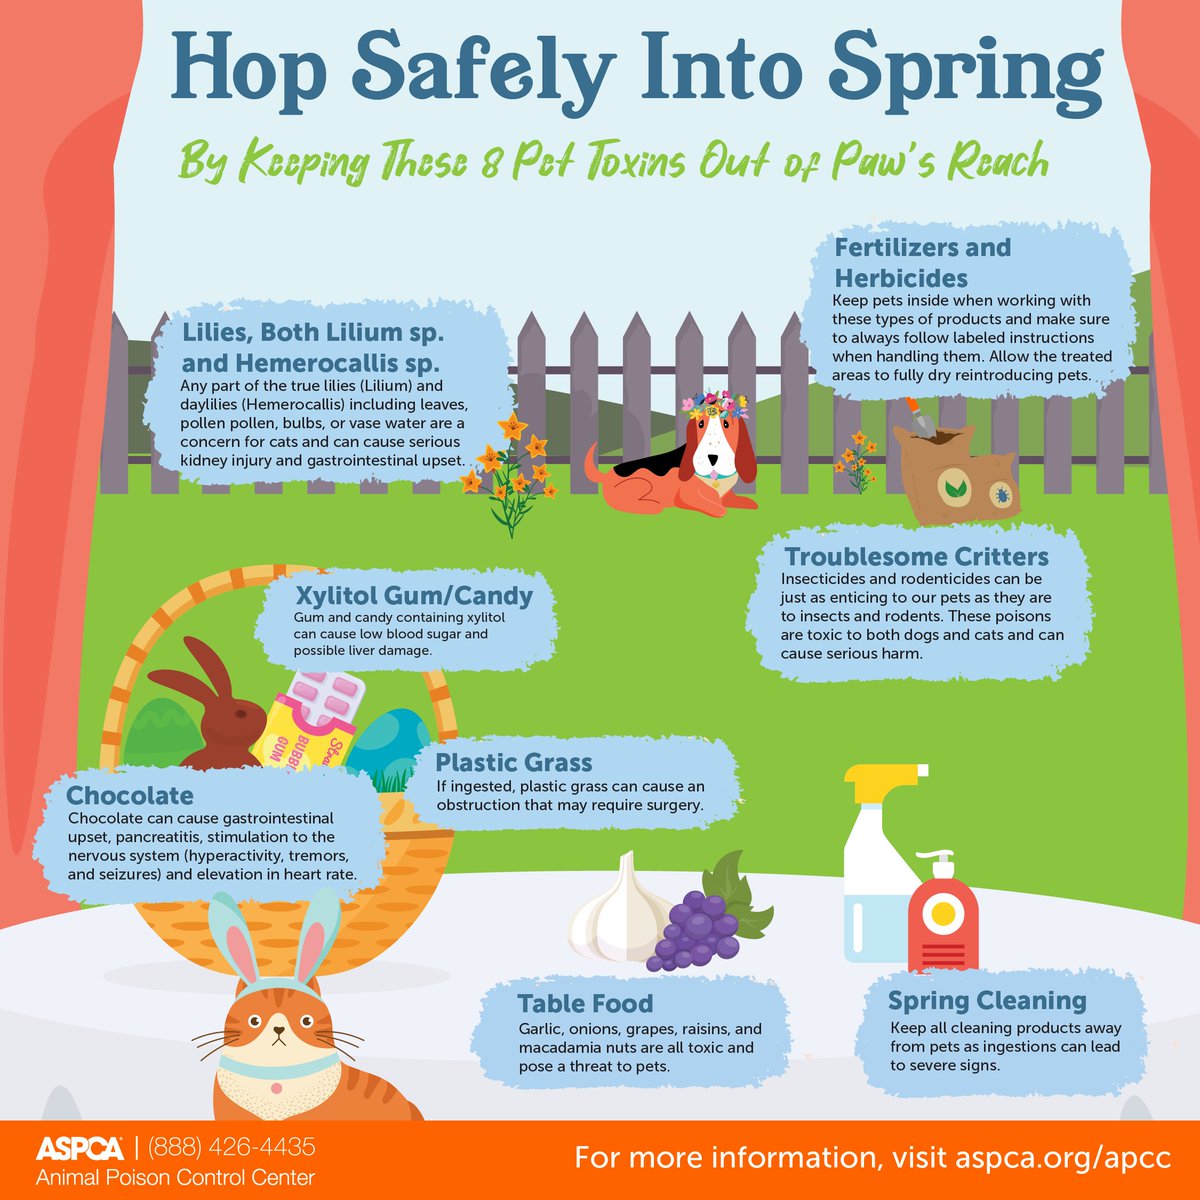 Hop safely into spring! Share these tips with your community to ensure everyone has a happy and safe holiday weekend. 🐰🌷🥚 #PreventPetPoisonings #PetSafety #APCC #ASPCA #AnimalWelfare #PetSafety #VetMed